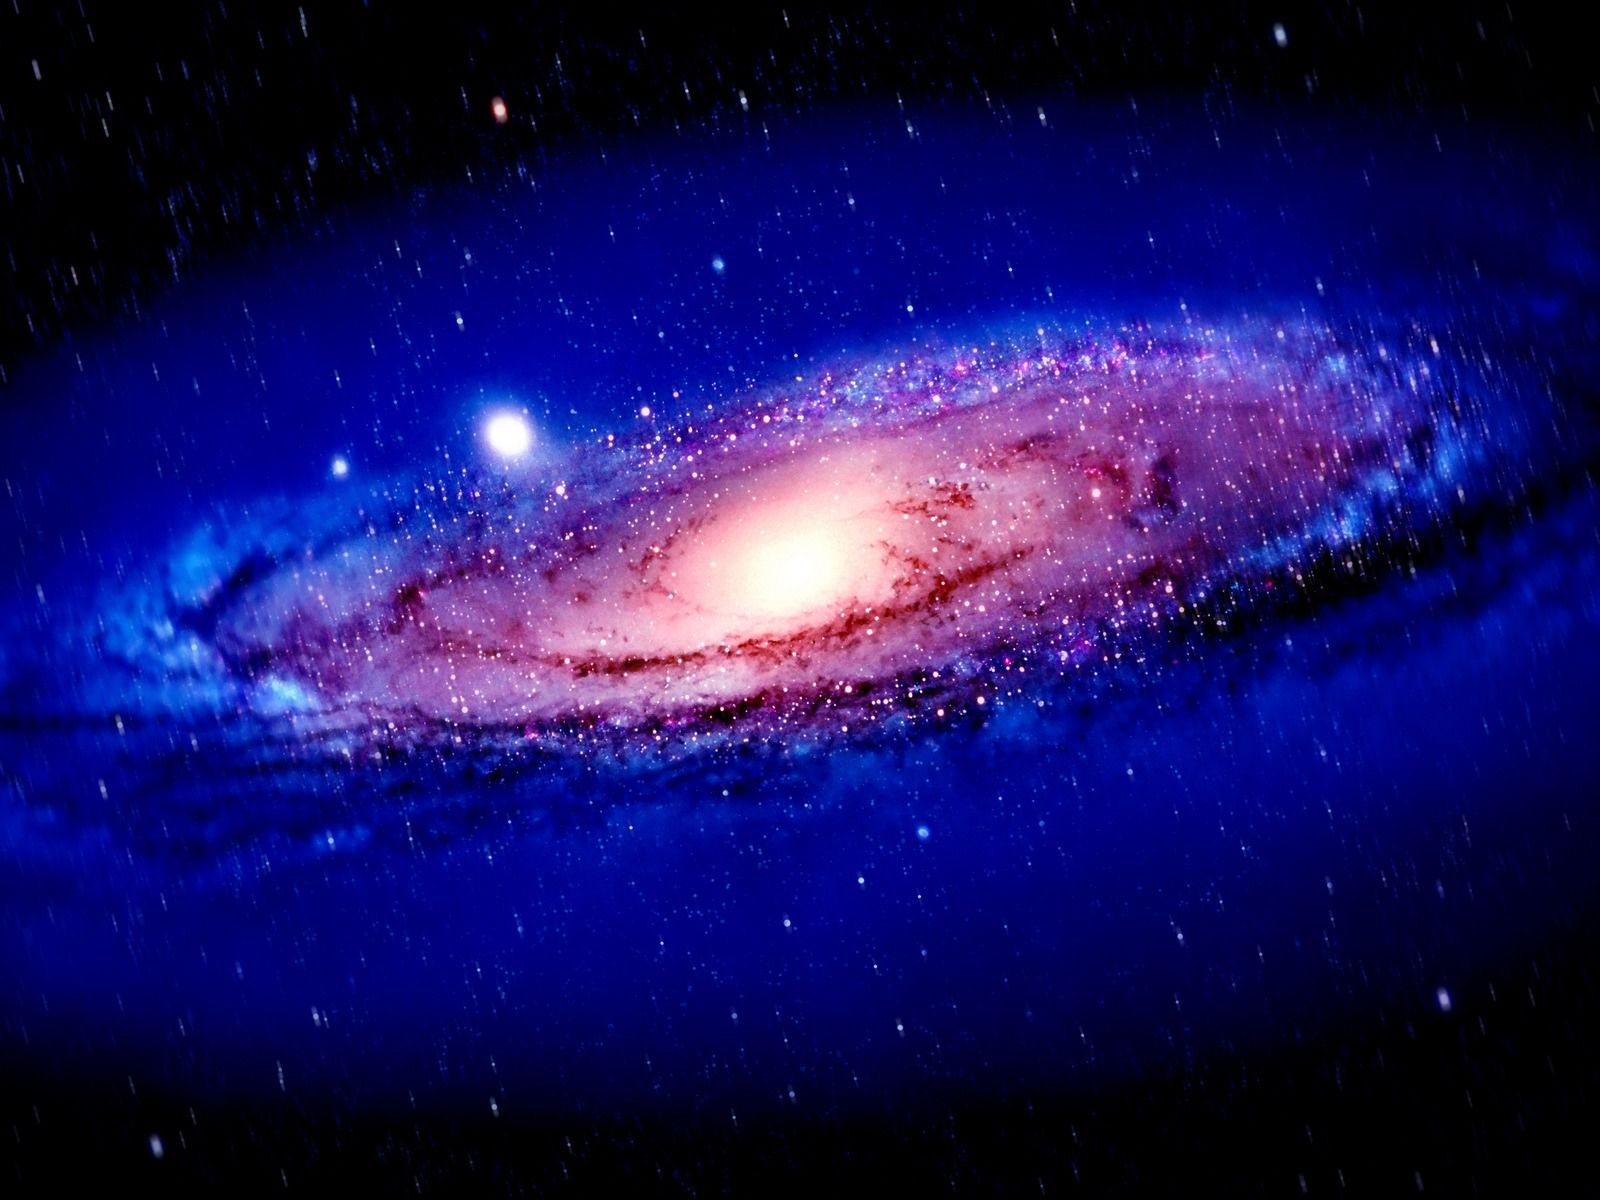 The milky way galaxy is shown in this image - Space